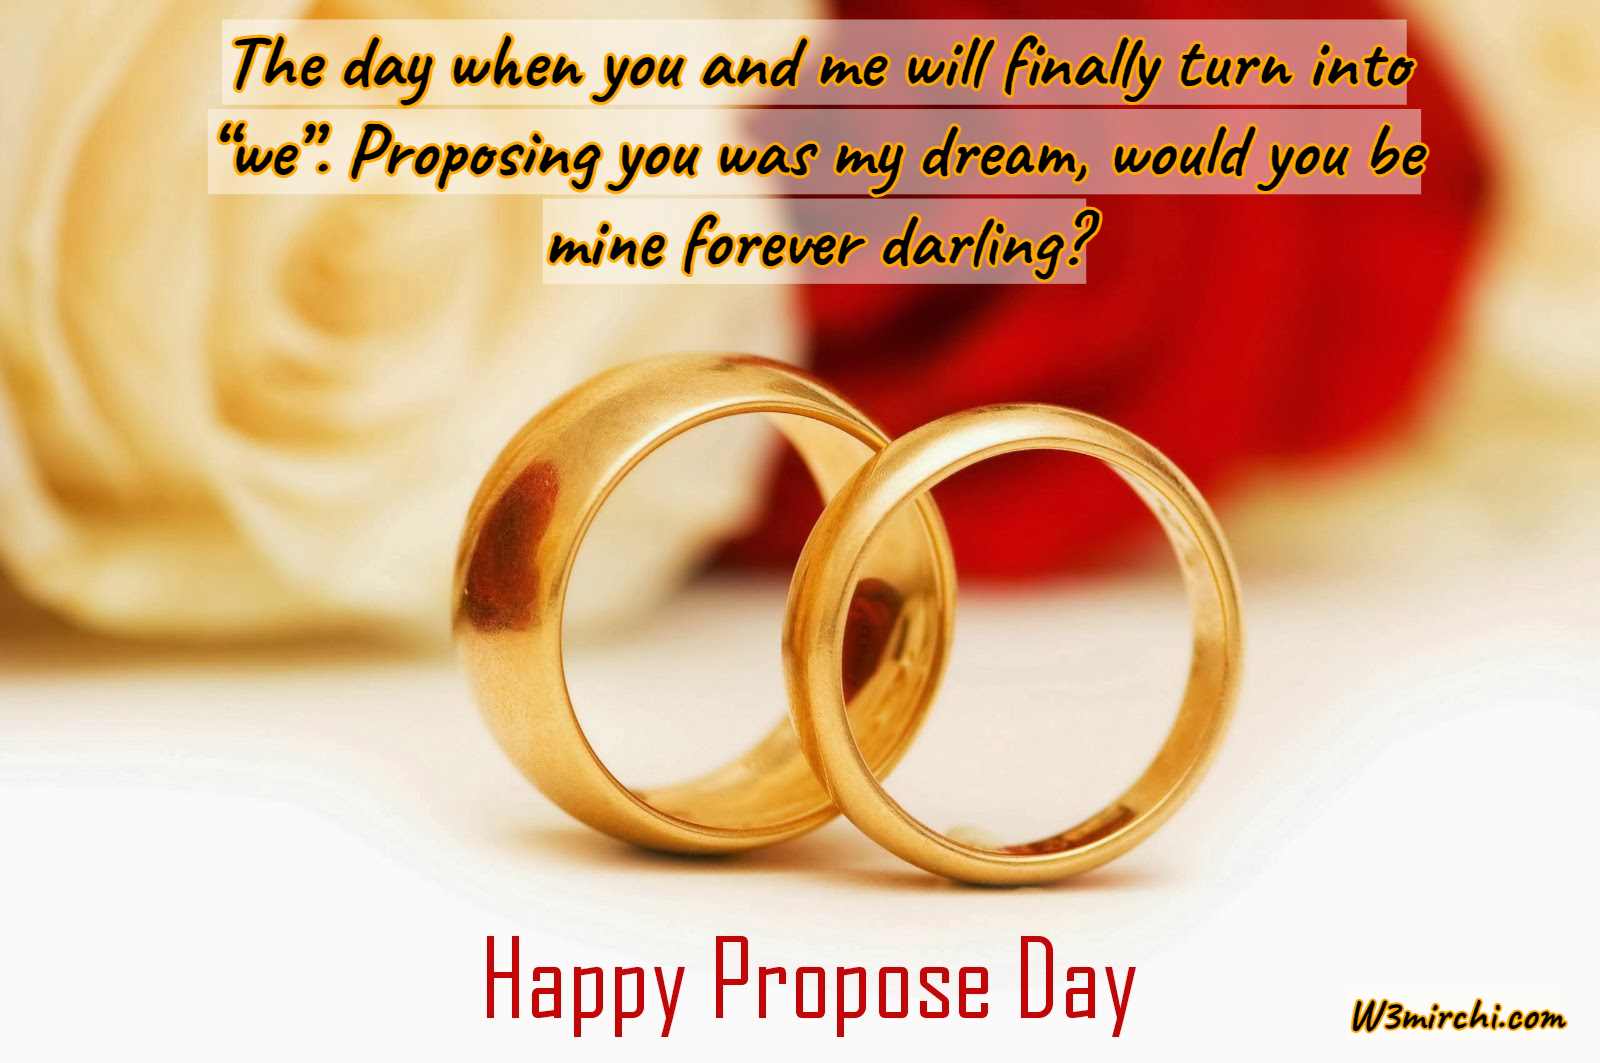 Happy Propose day My Love